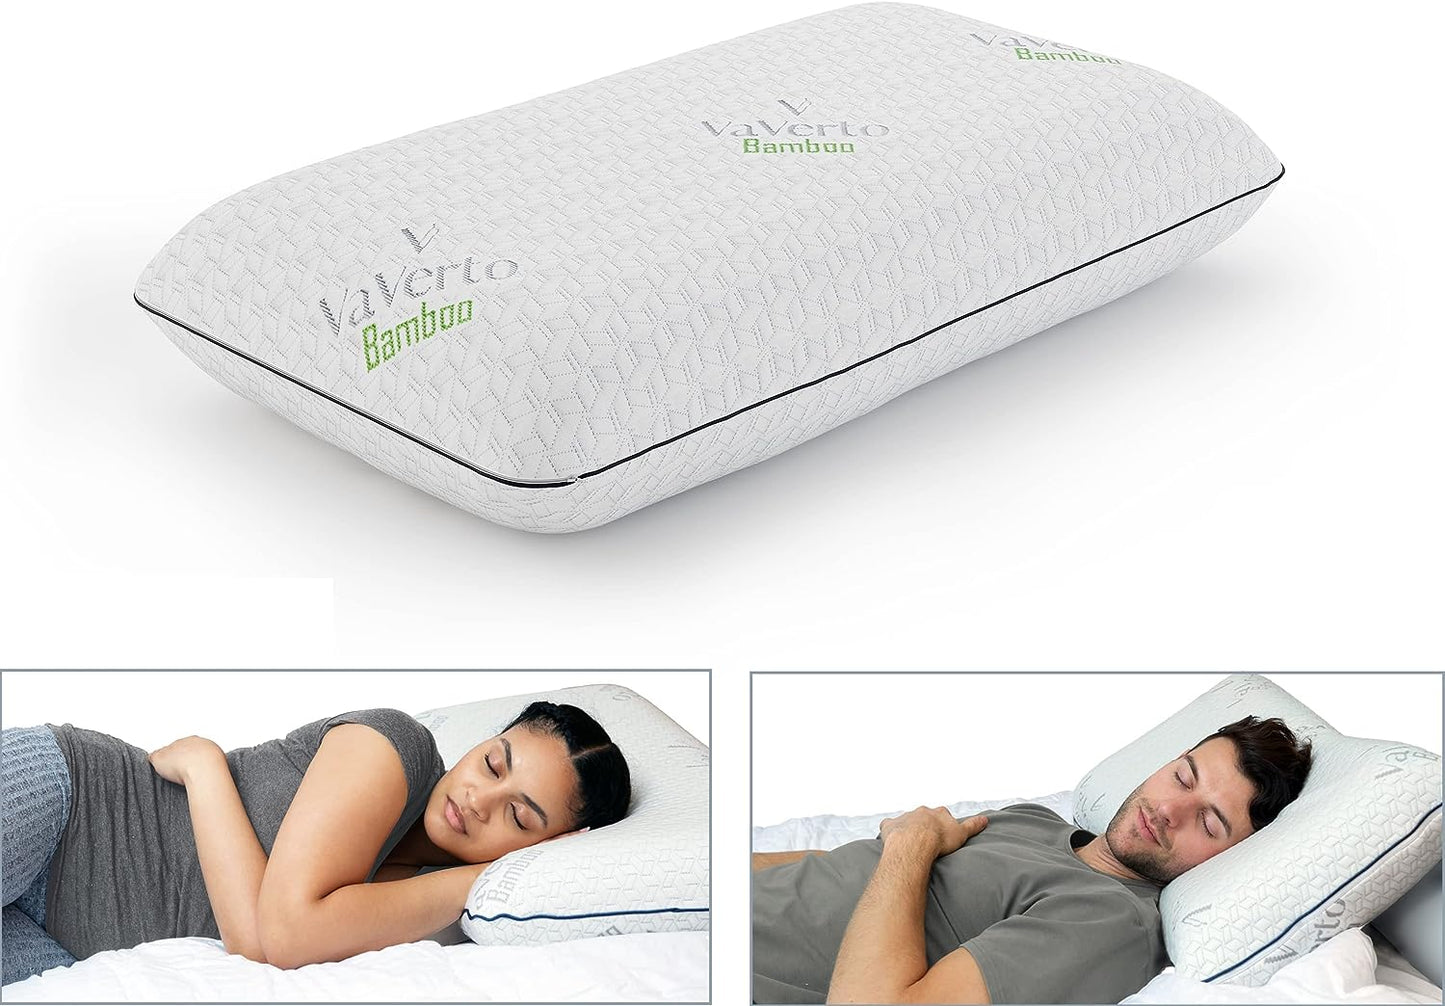 New Gel Memory Foam Pillow -Standard Size - Ventilated, Premium Bed Pillows with Washable and Bamboo Pillow Cover, Cooling, Orthopedic Sleeping, Side and Back Sleepers - Dorm Room Essentials